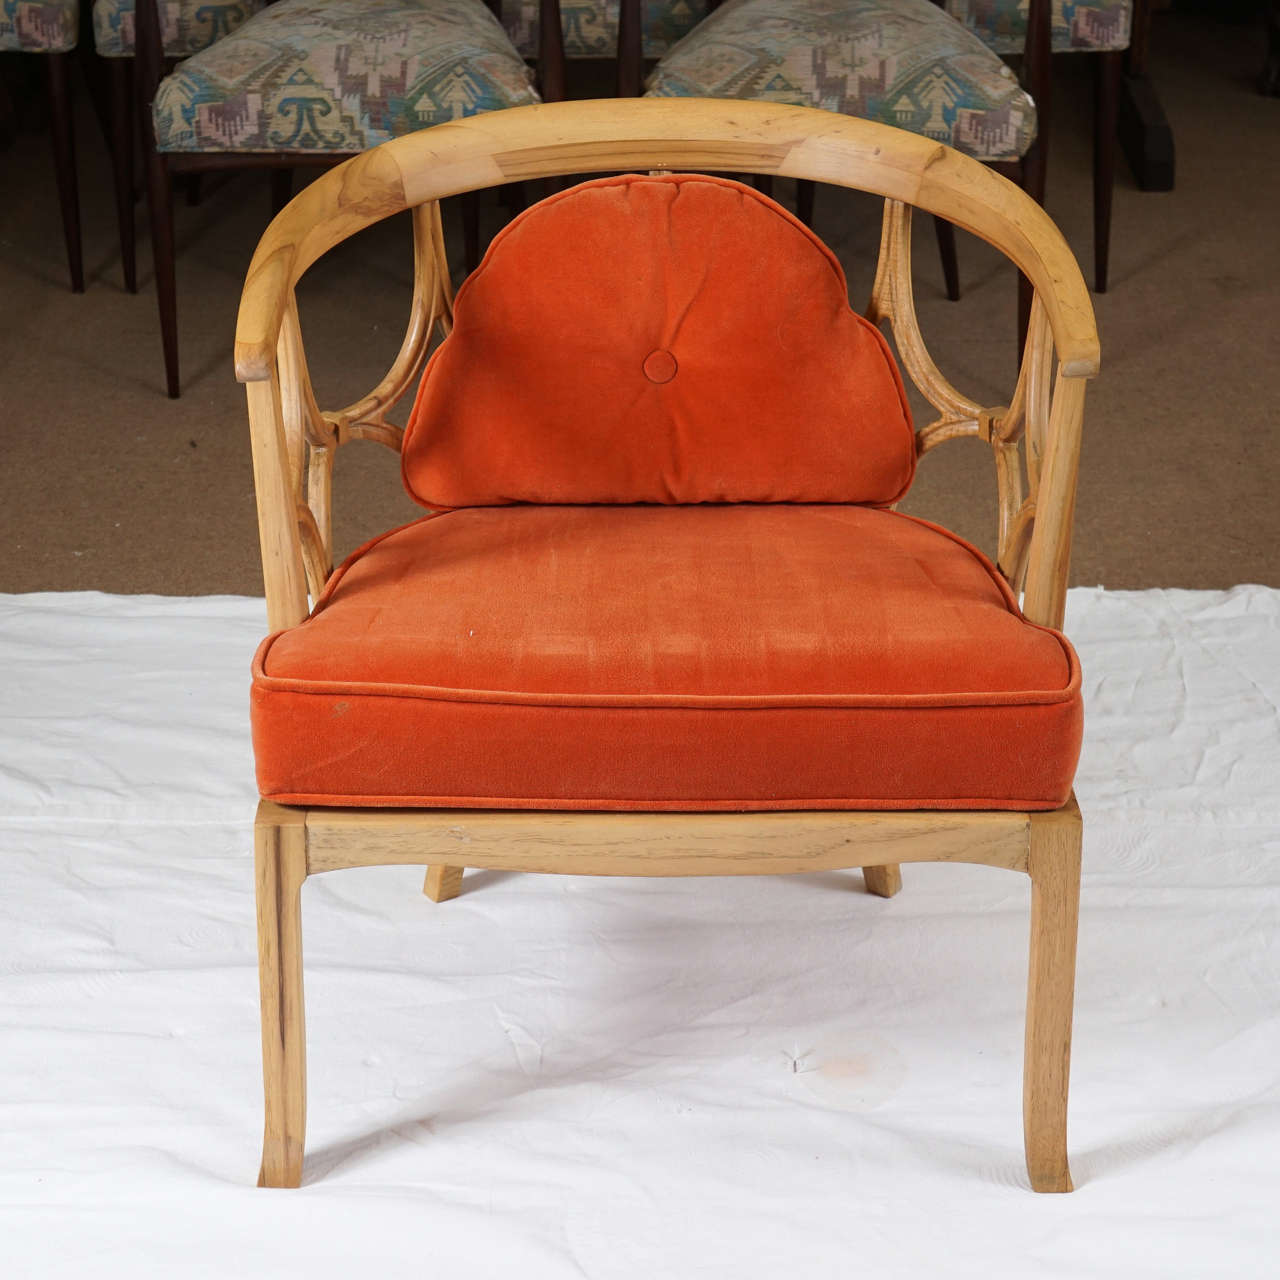 Pair Of Mid Century Modern Chairs After Dorothy Draper For Sale At